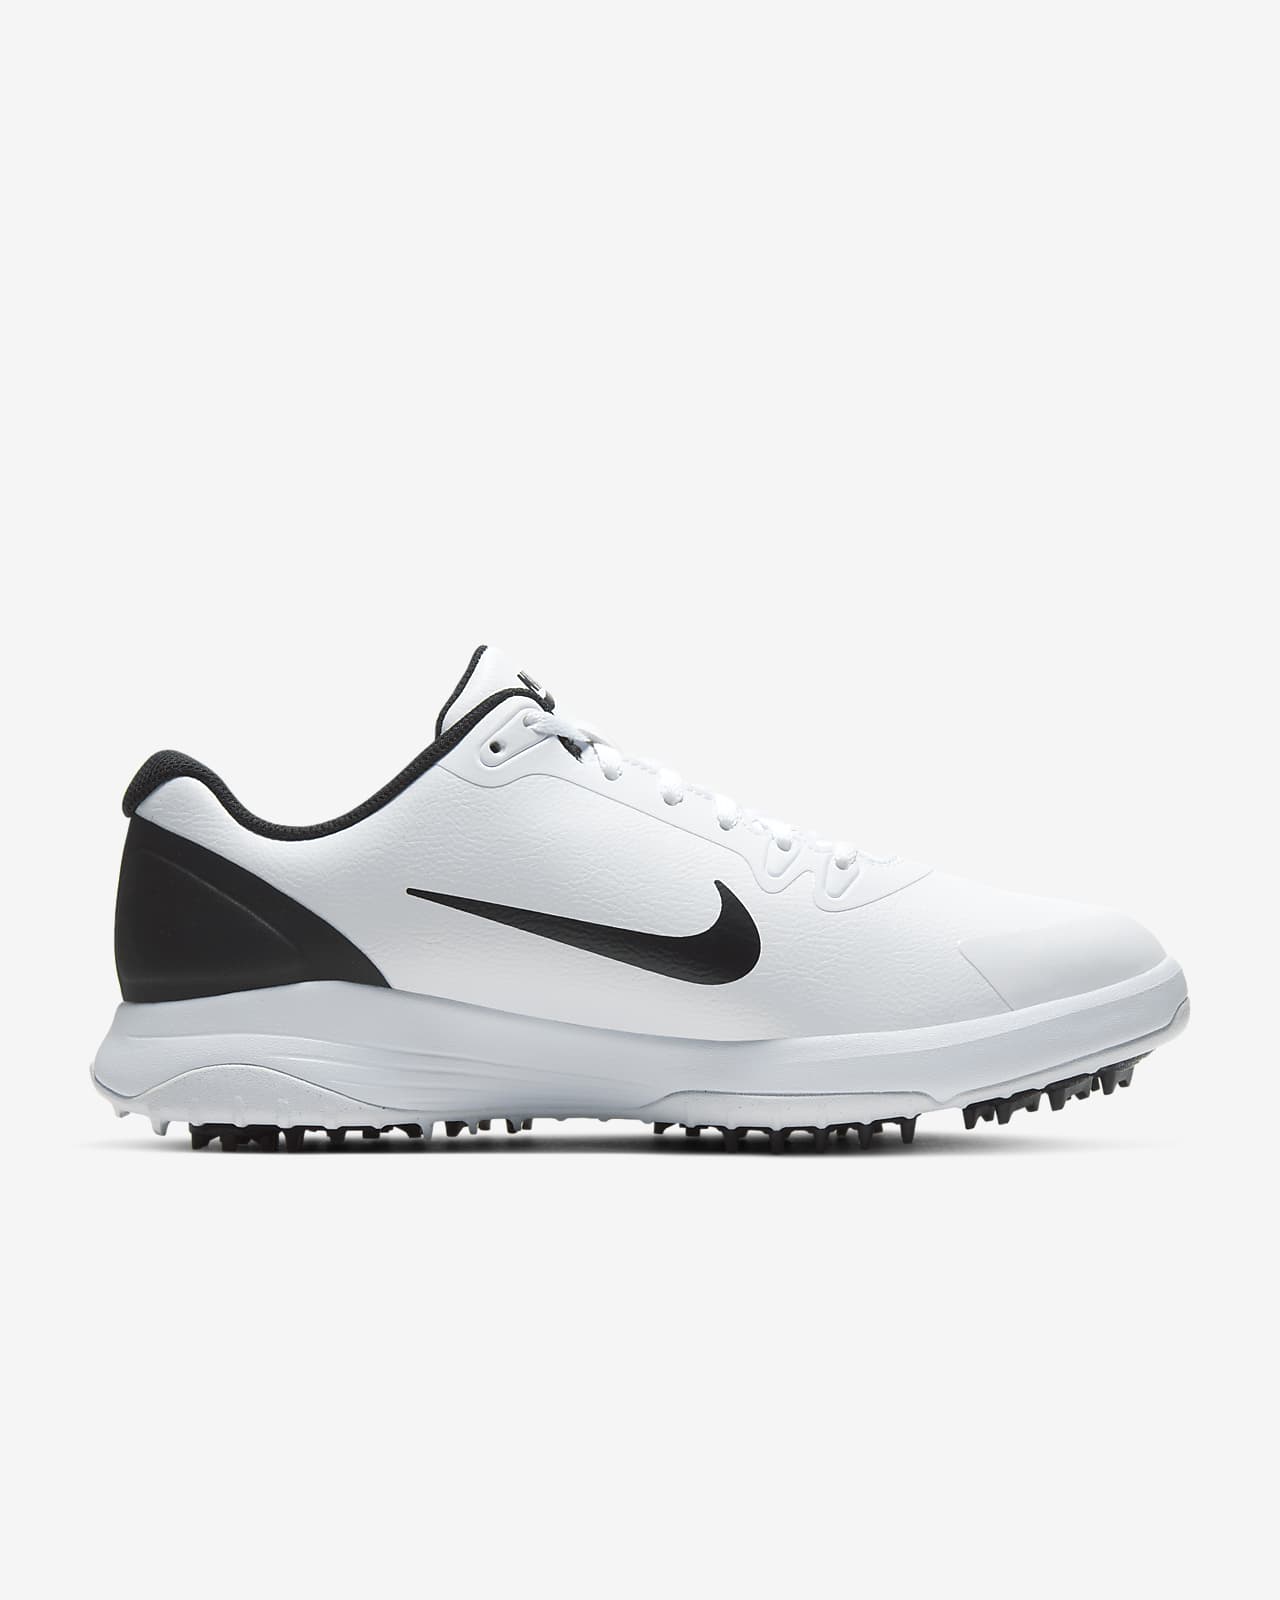 Afrikaanse Hover Frons Nike Infinity G Golf Shoe (Wide). Nike.com